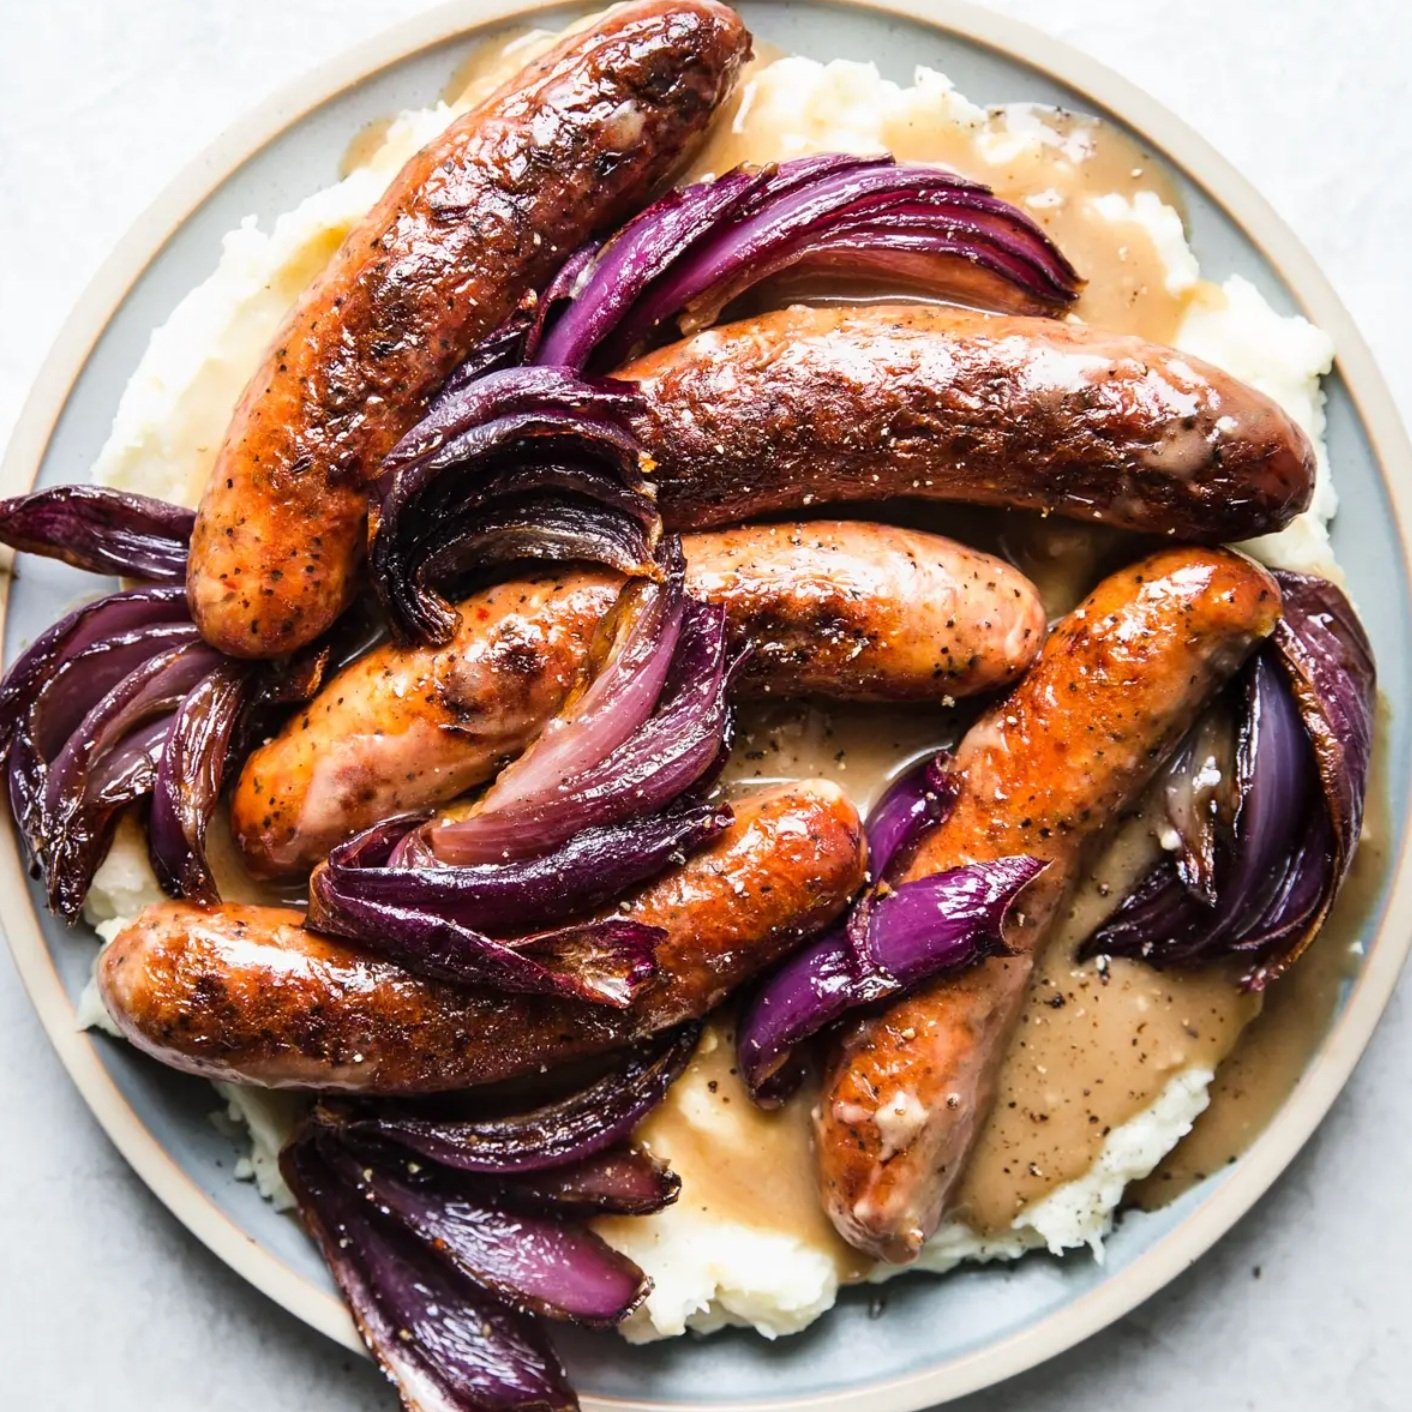 Bangers and Mash with Caramelized Onions